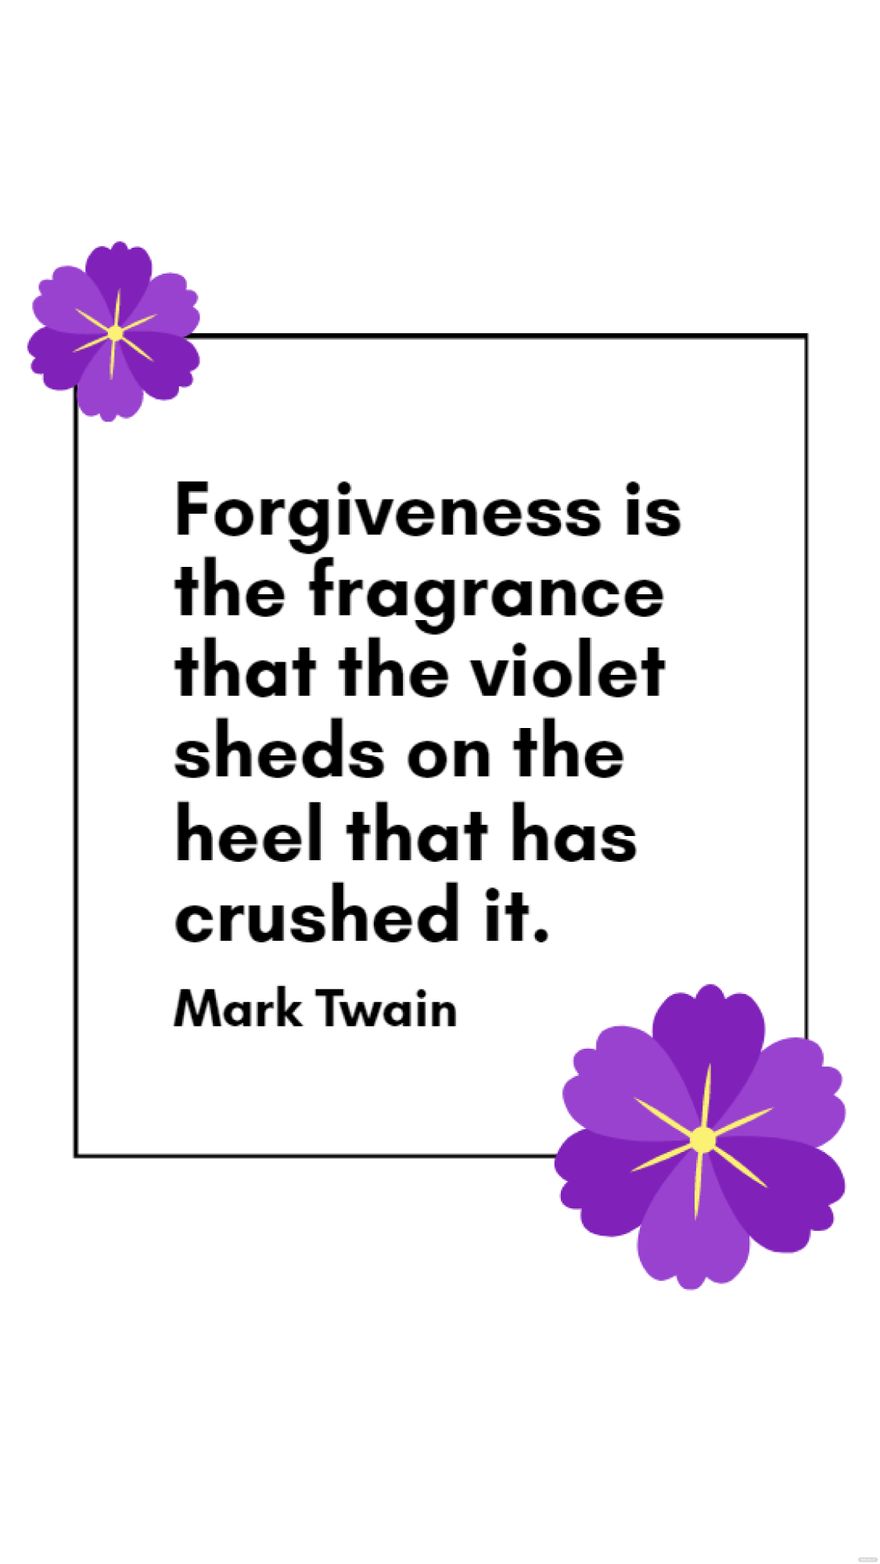 Mark Twain - Forgiveness is the fragrance that the violet sheds on the heel that has crushed it.